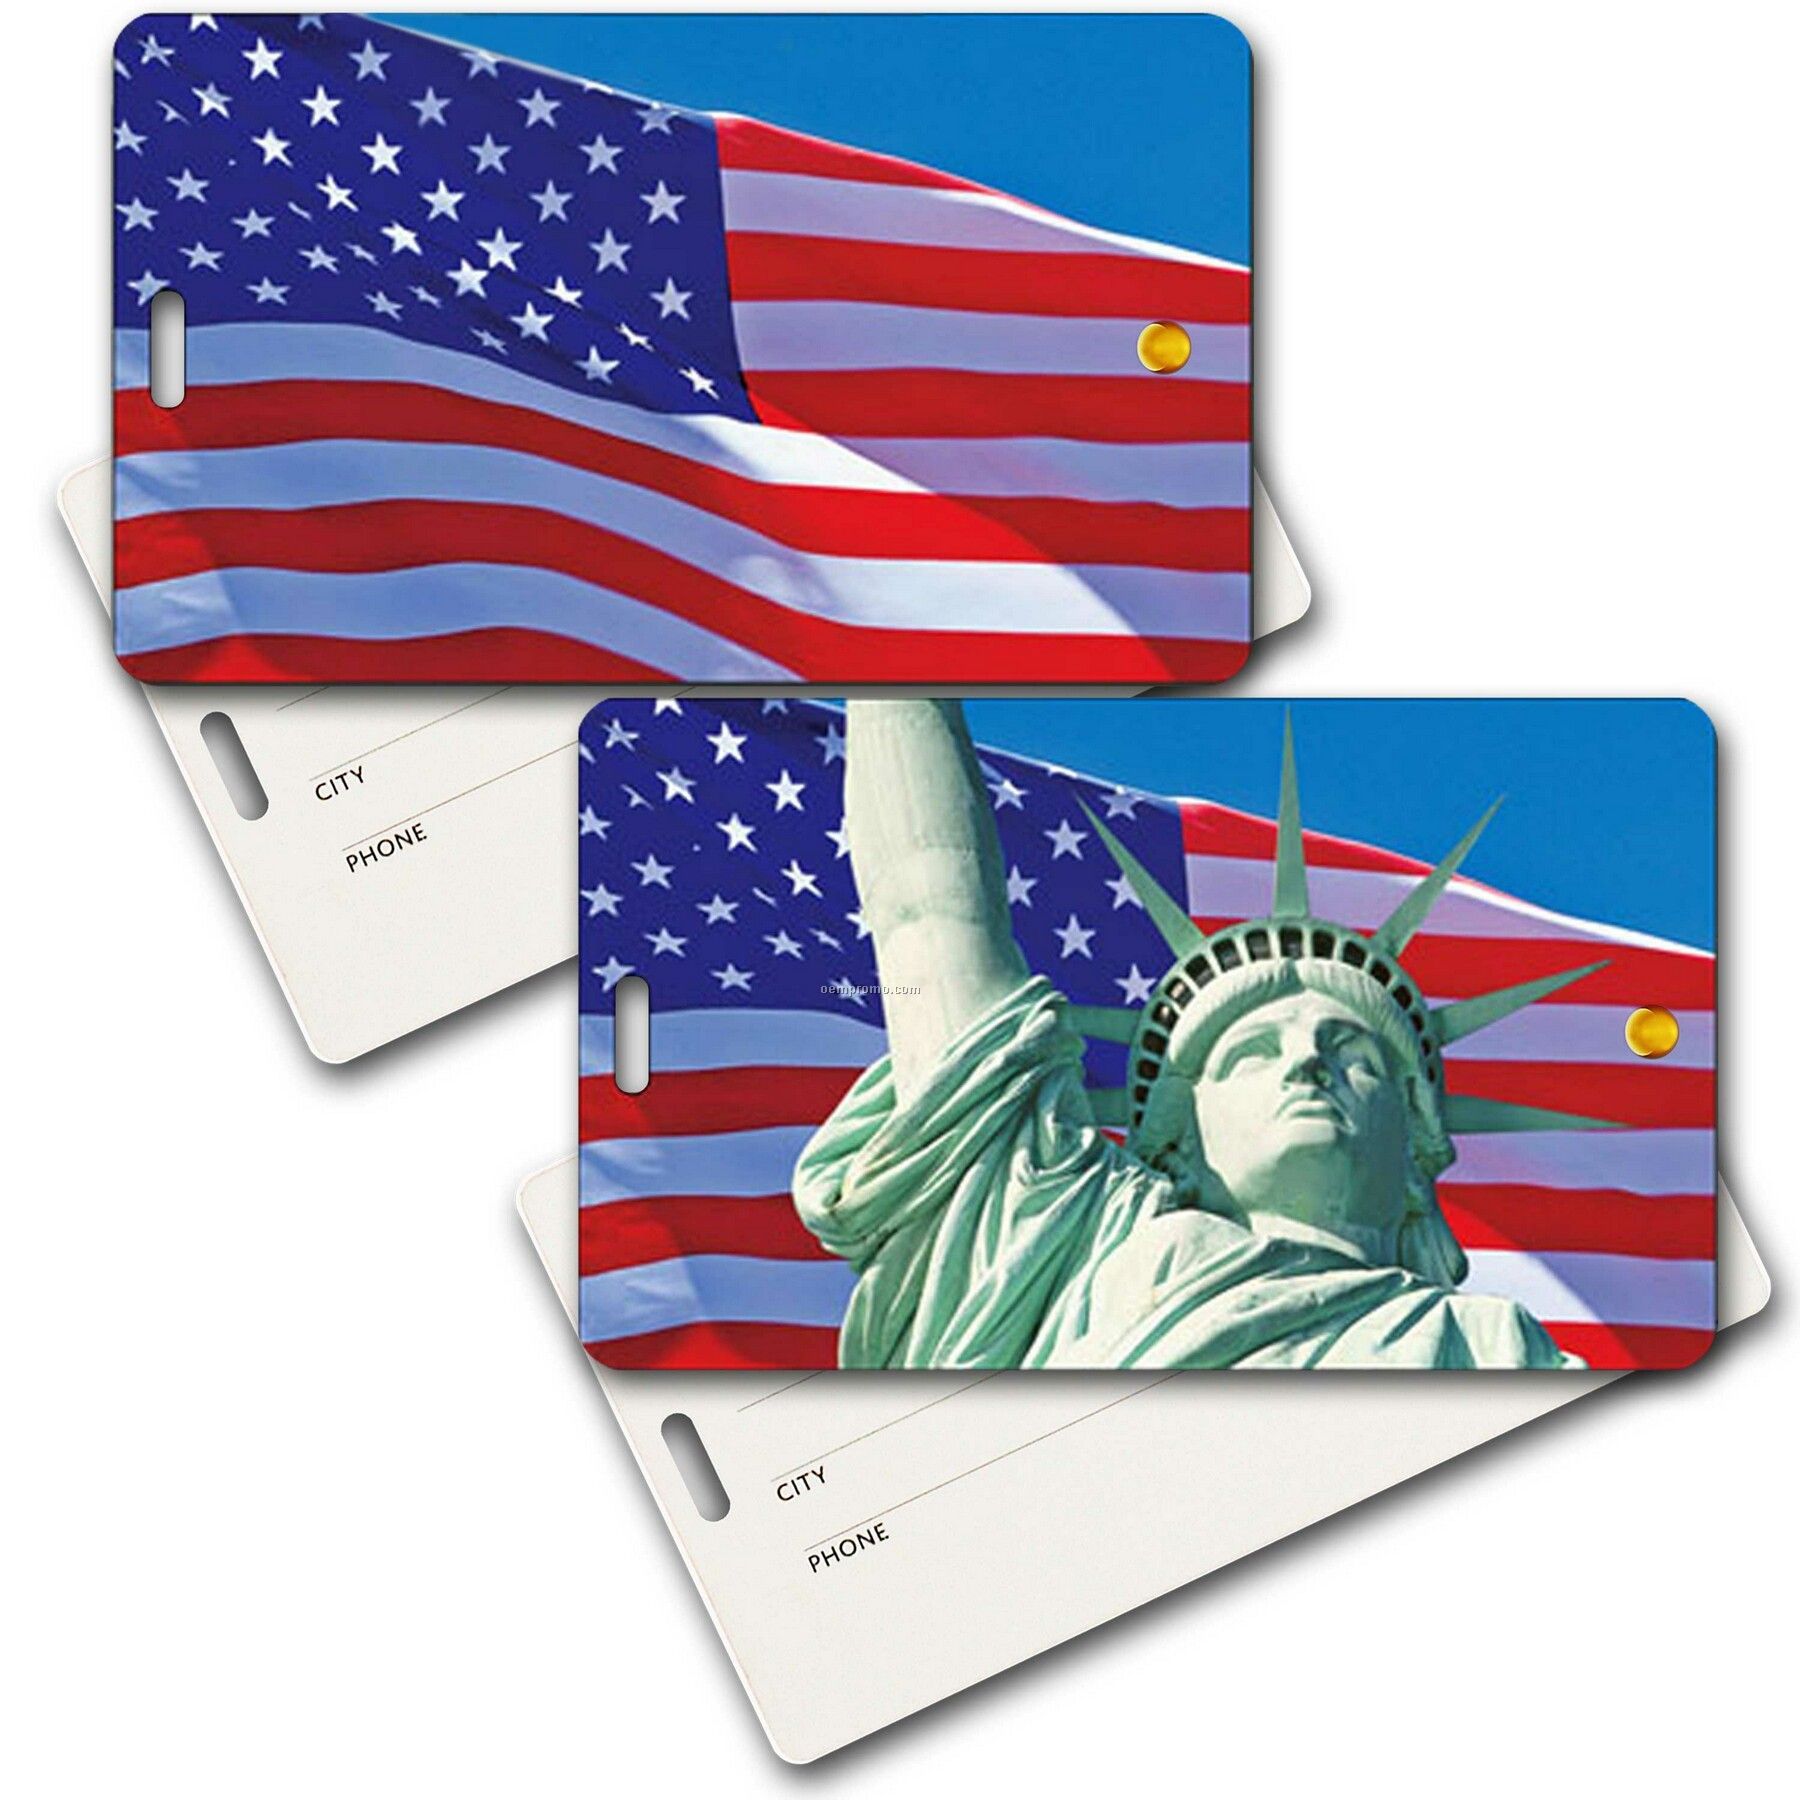 Privacy Tag W/3d Lenticular Images Of Lady Liberty And Us Flag (Blanks)